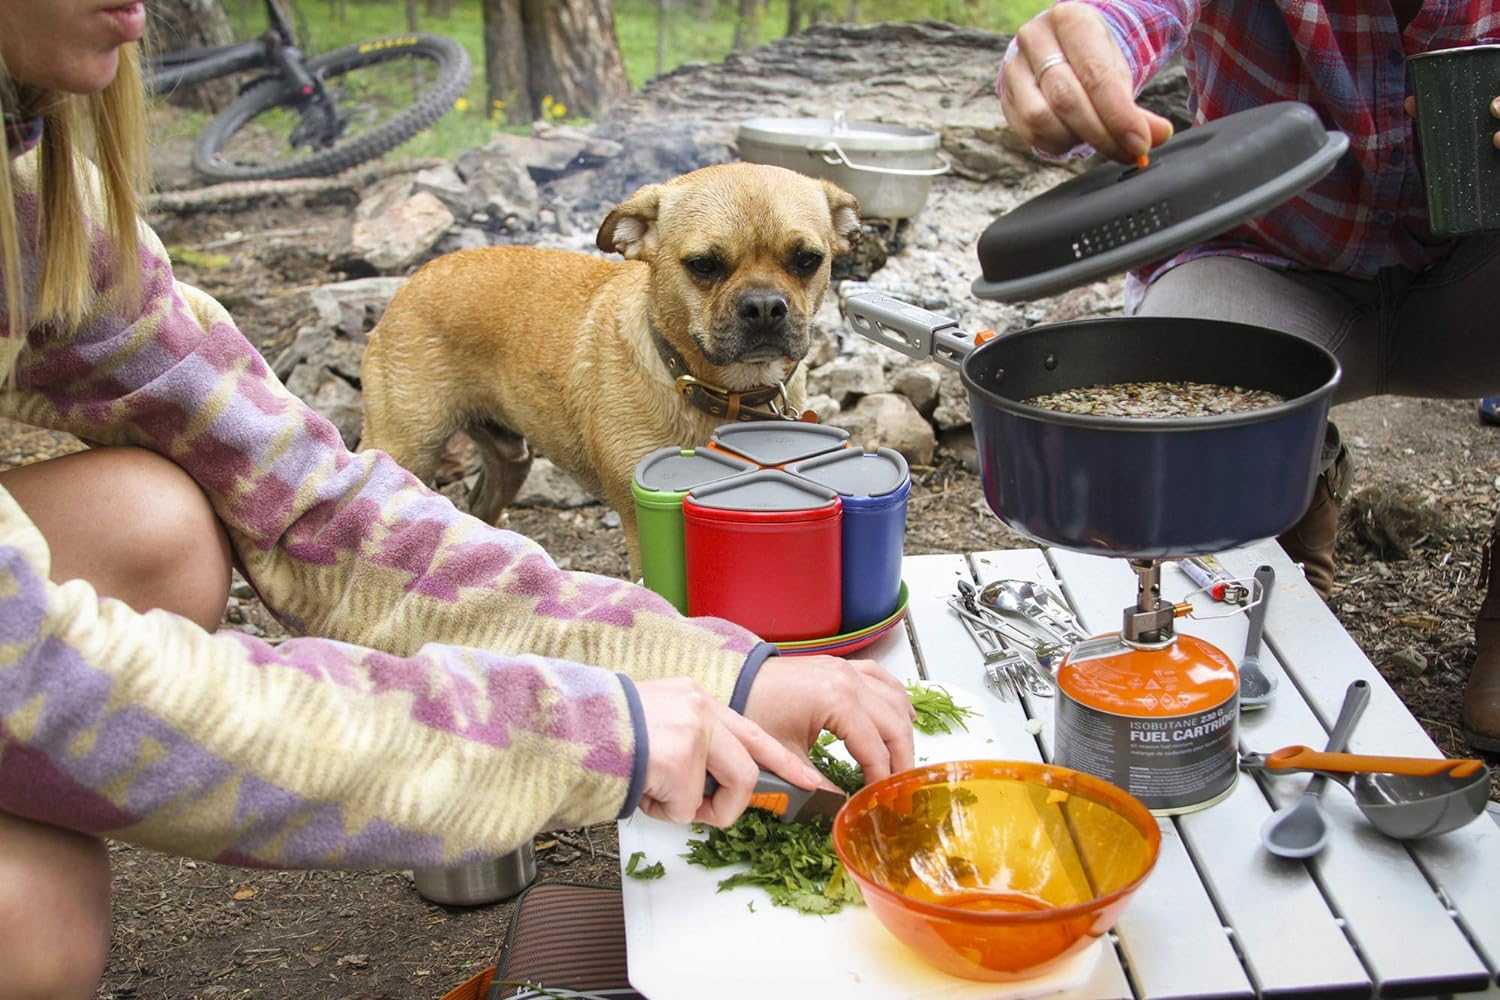 GSI Outdoors, Bugaboo Backpacker, Nesting Cook Set, Superior Backcountry Cookware Since 1985